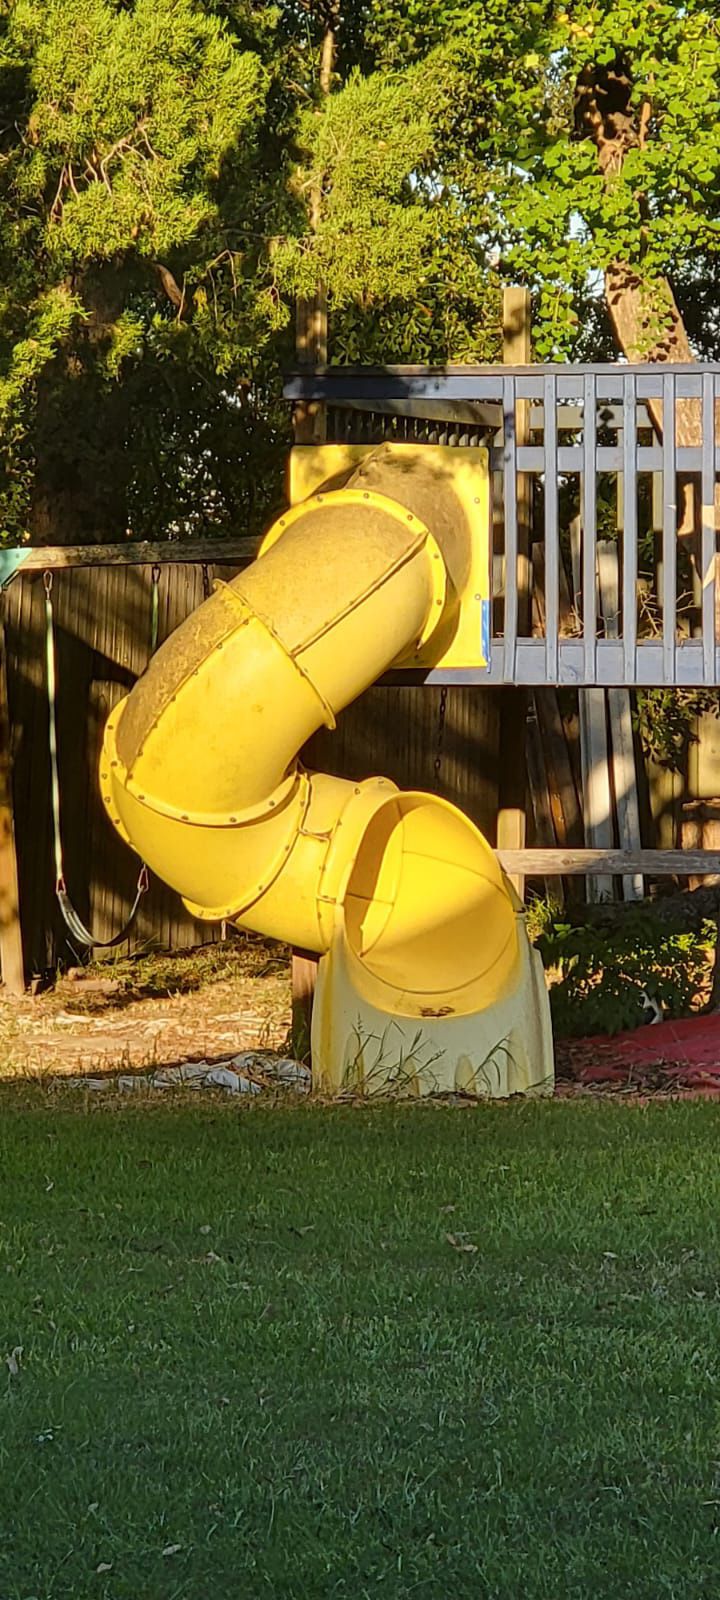 Yellow Slide For 300 Or Best Offer